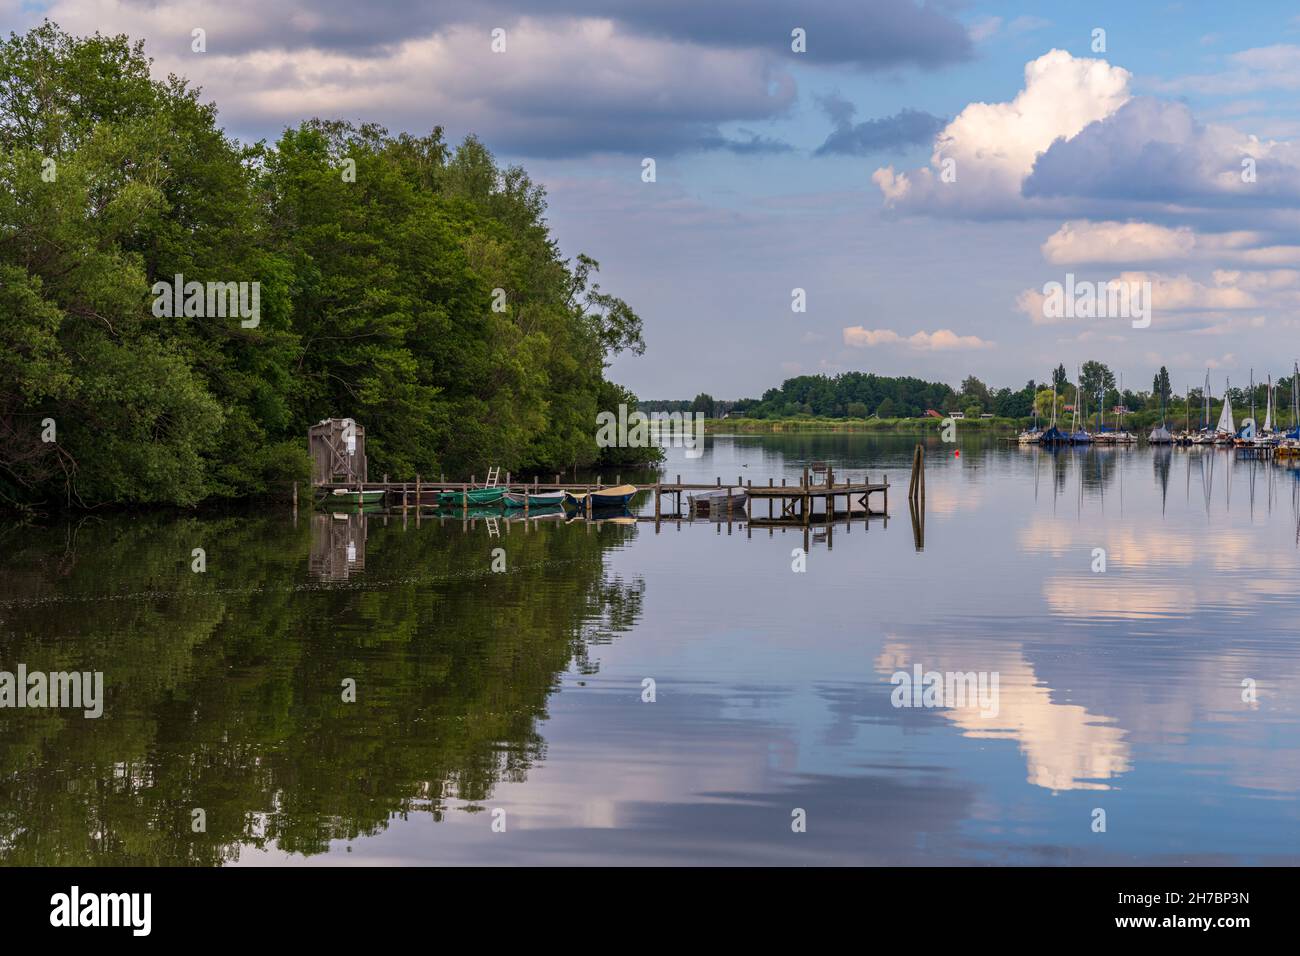 Steinhude, Lower Saxony, Germany - June 08, 2020: View at the Steinhuder Meer with a jetty and the marina near the bathing island Stock Photo